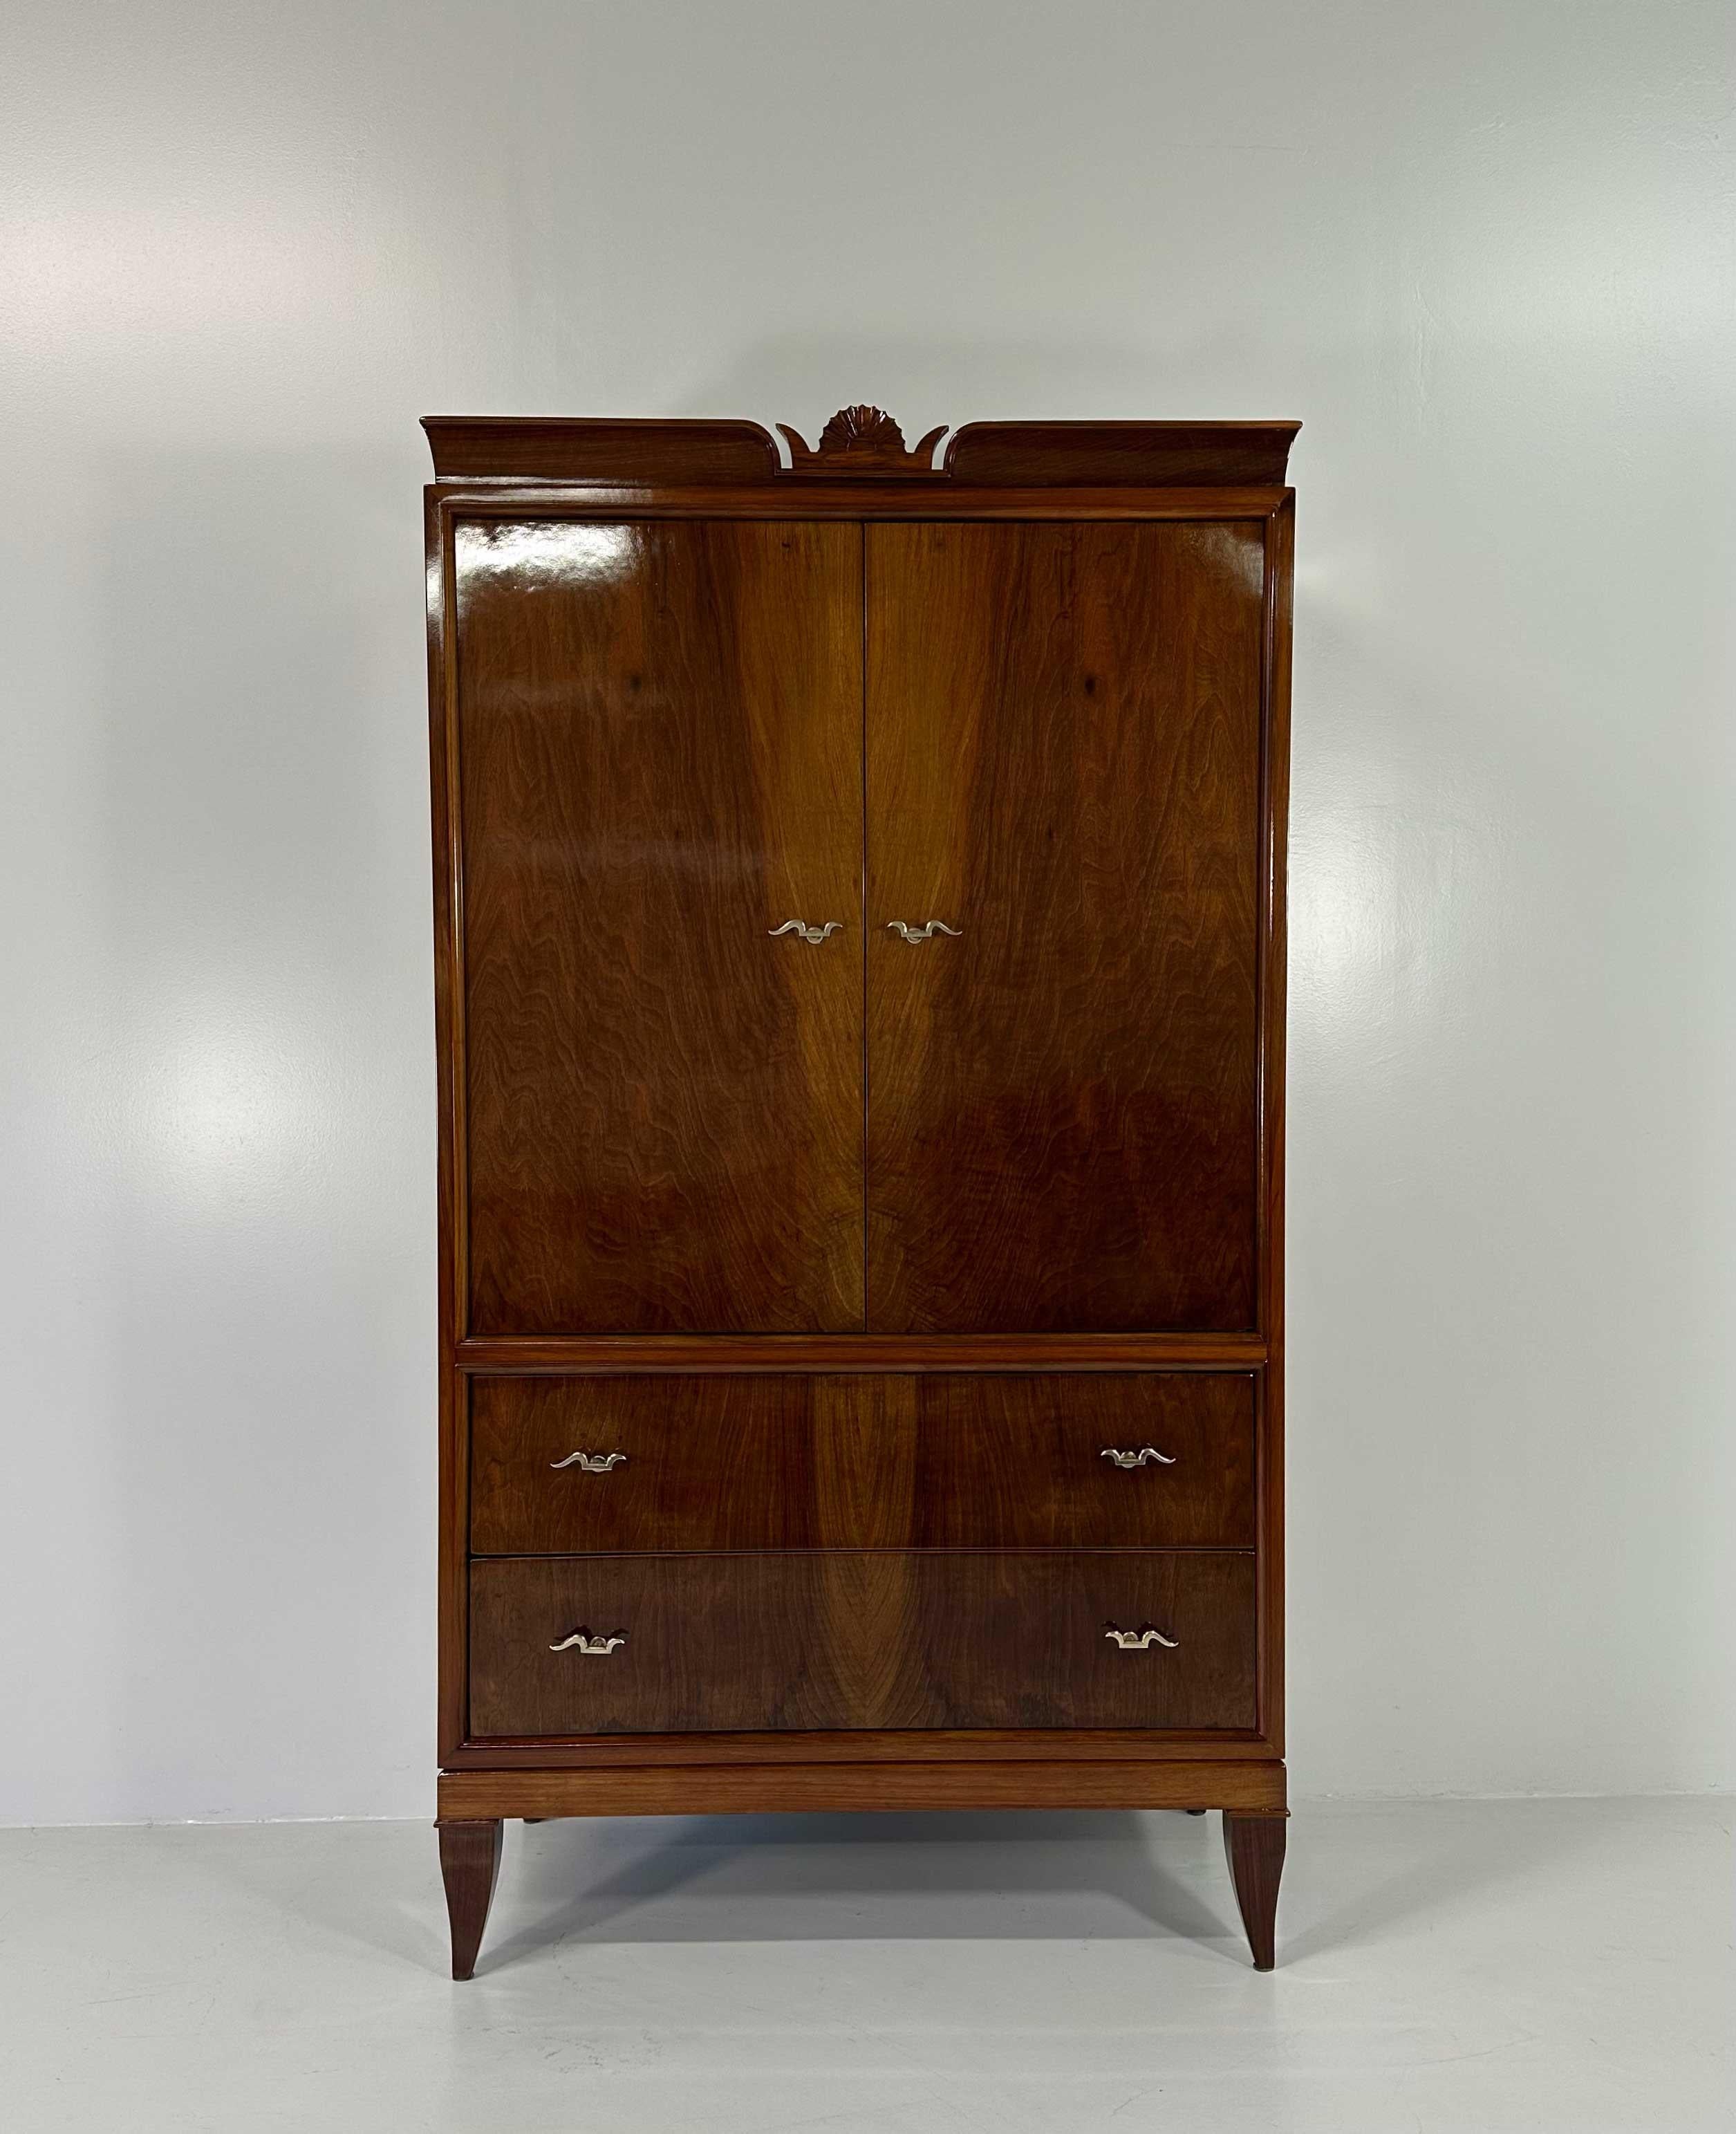 This wardrobe was produced in Italy, in Cantù (small village in the north of Italy, next to Milan), by Paolo Lietti & Figli and designed by Gio Ponti. It features a mirror manufactured by Luigi Brusotti and a matching dresser, as you can see in the